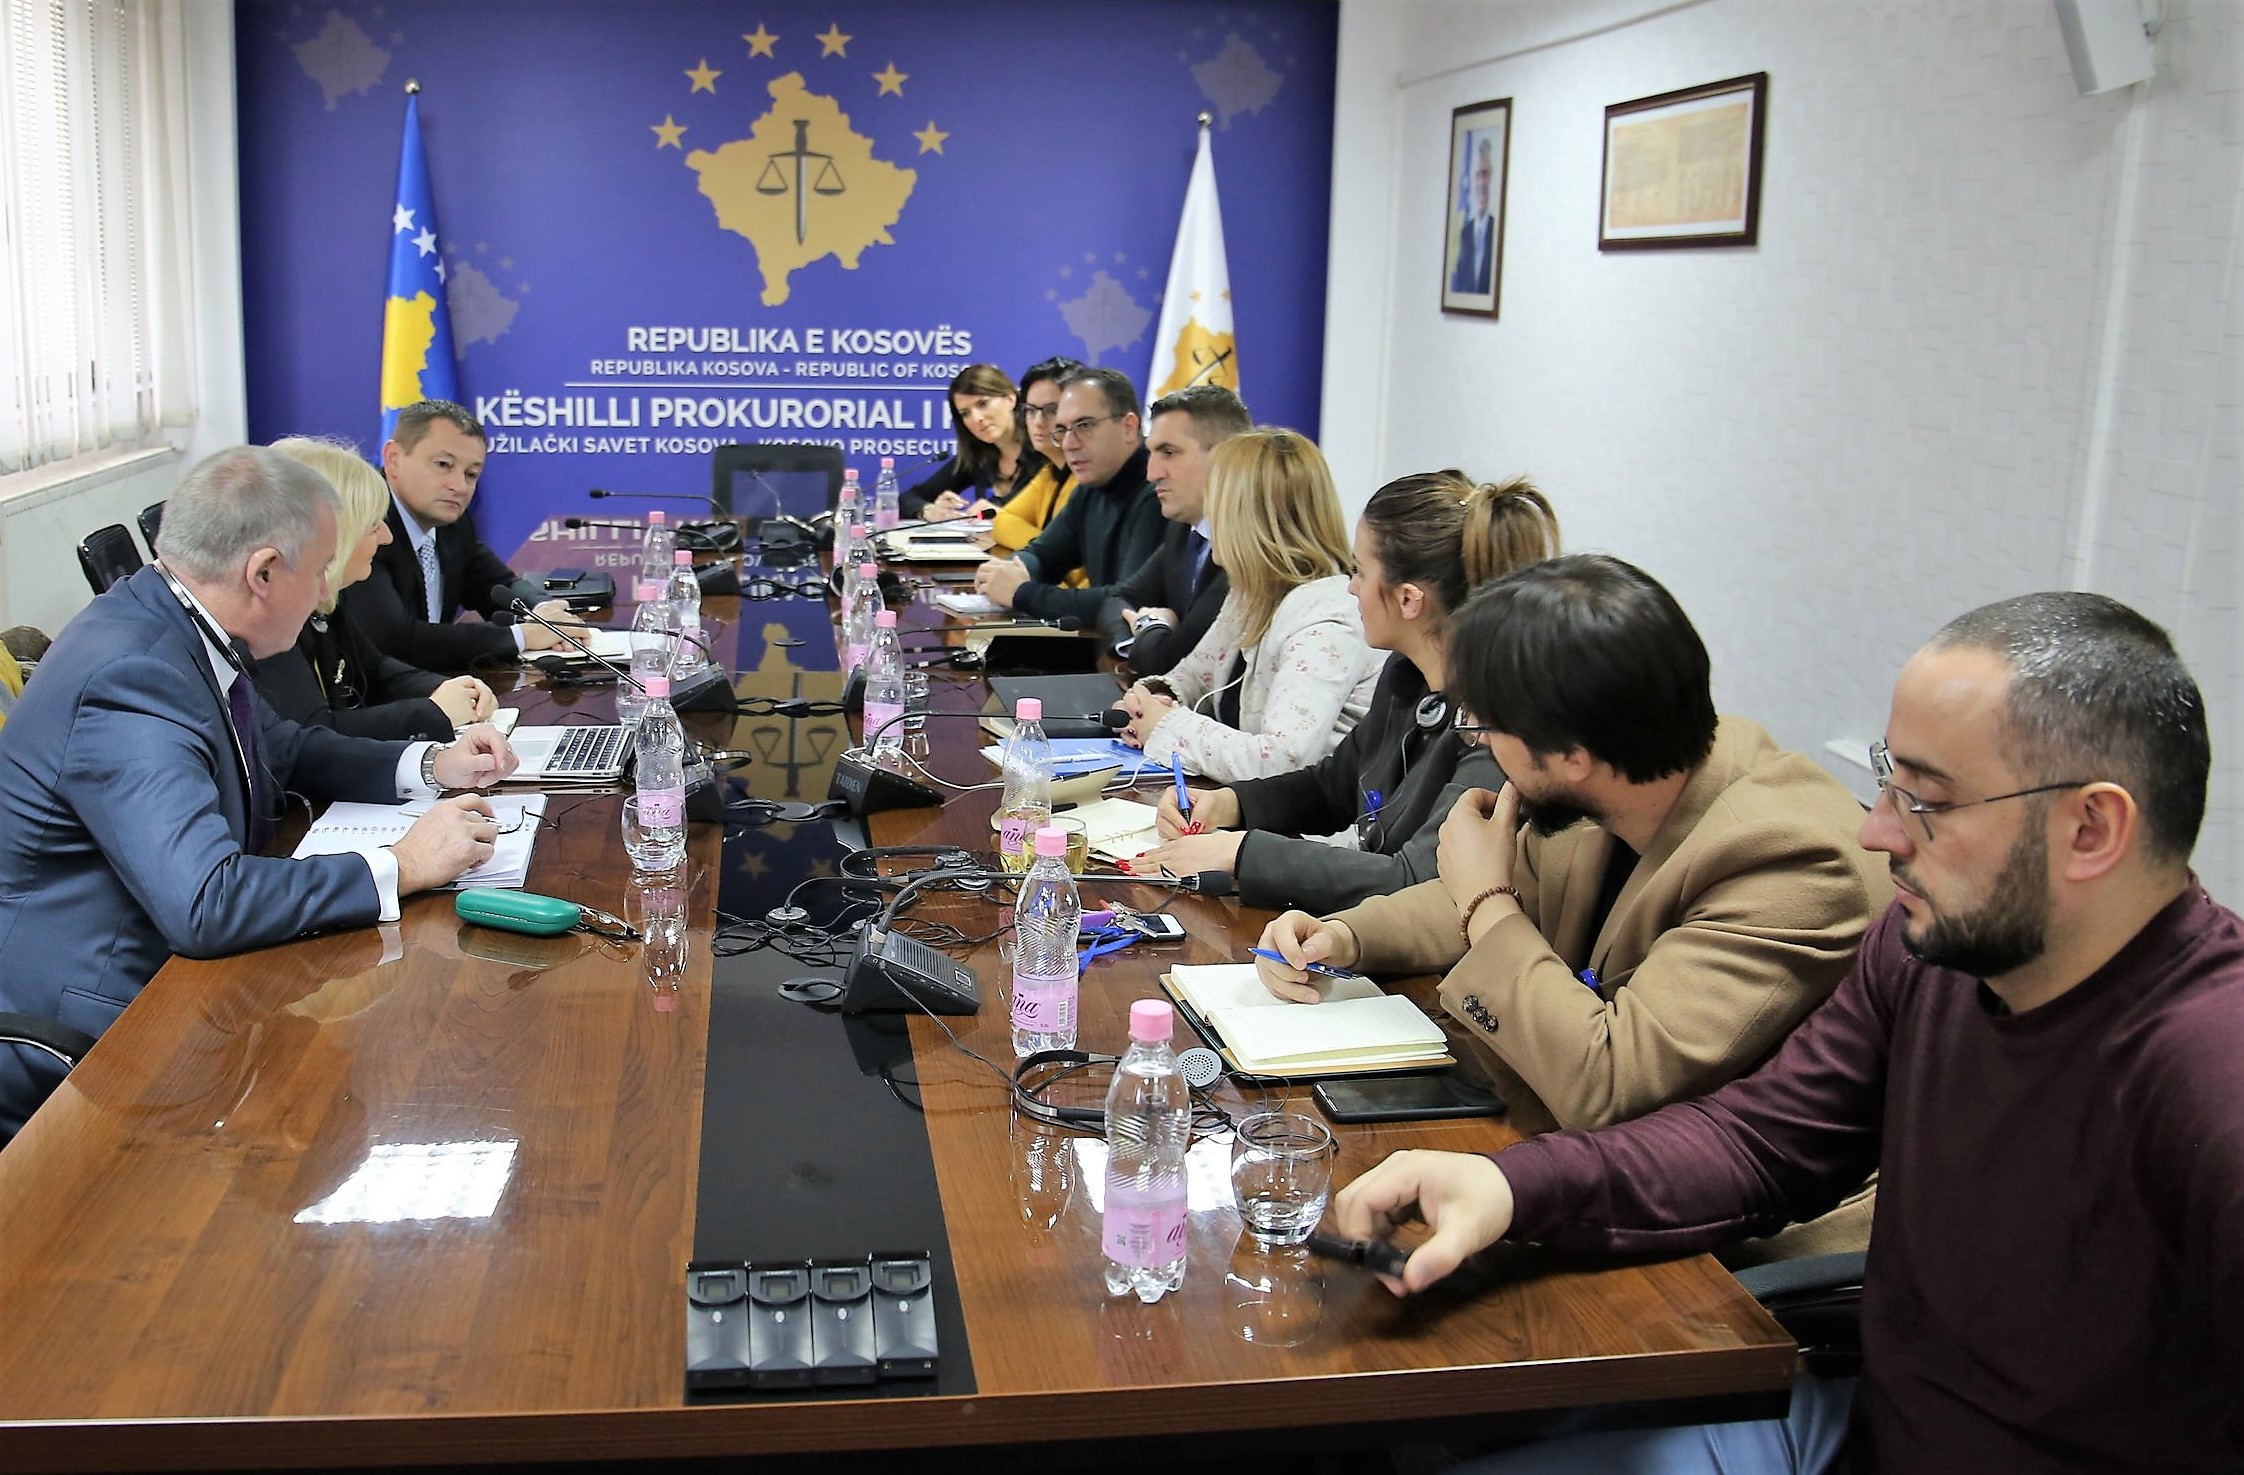 The activities of the Institutional Development Working Group are presented